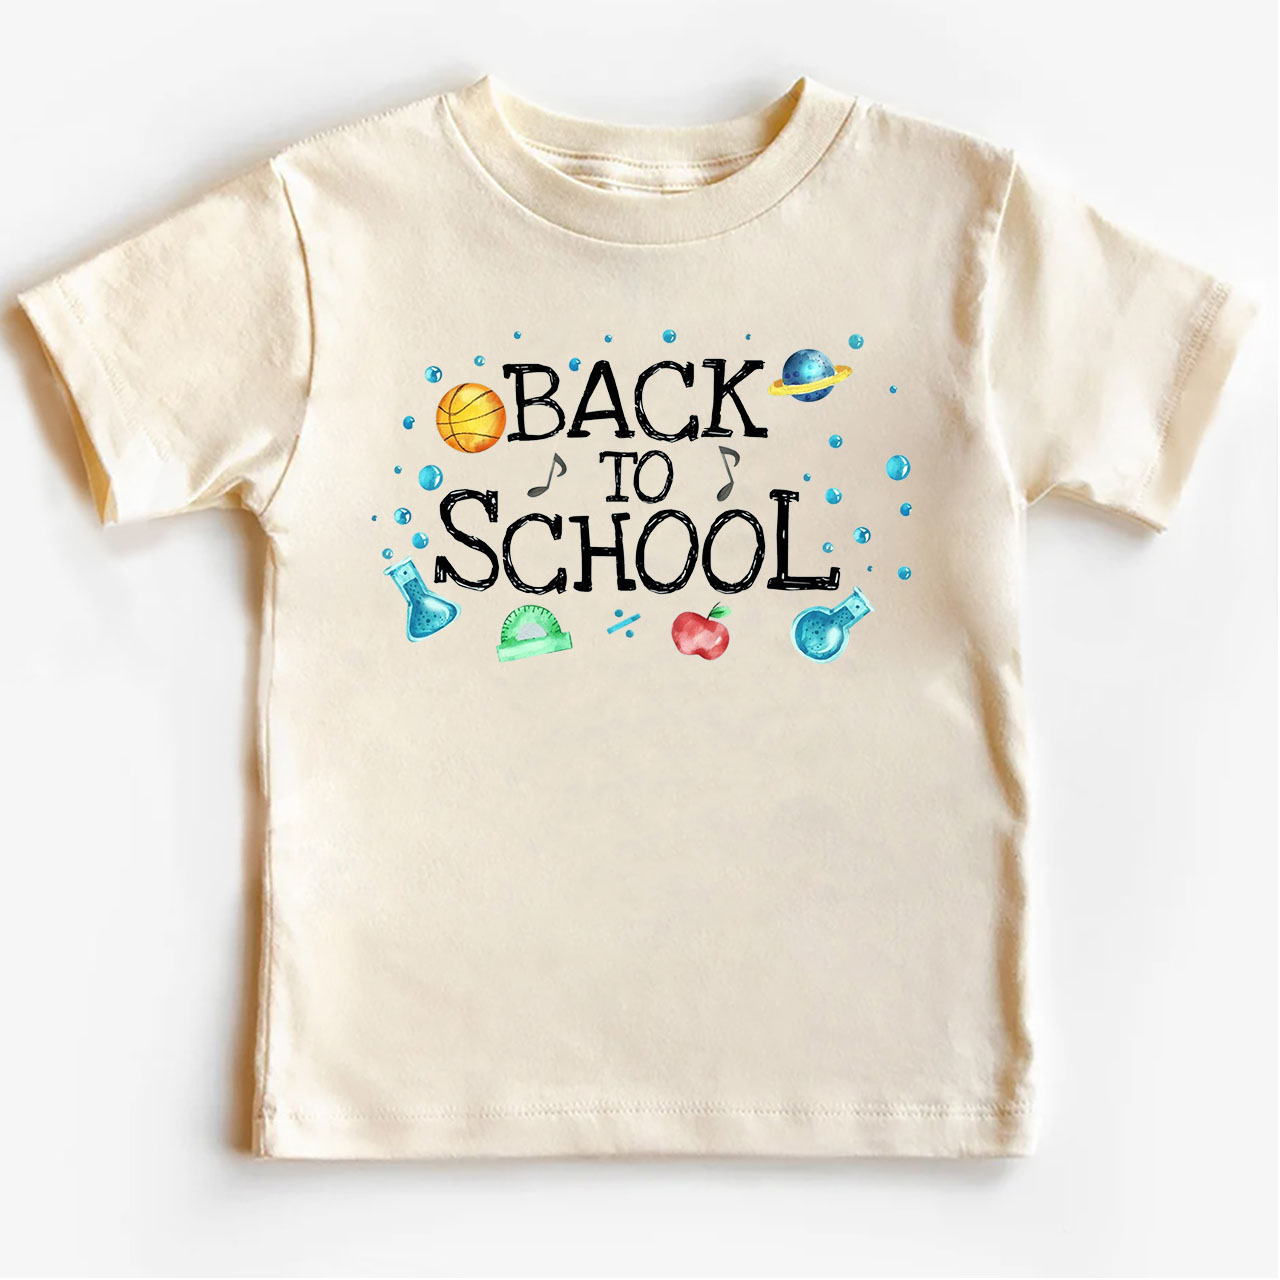 Back To School Funny School Shirt For Toddler&Kids